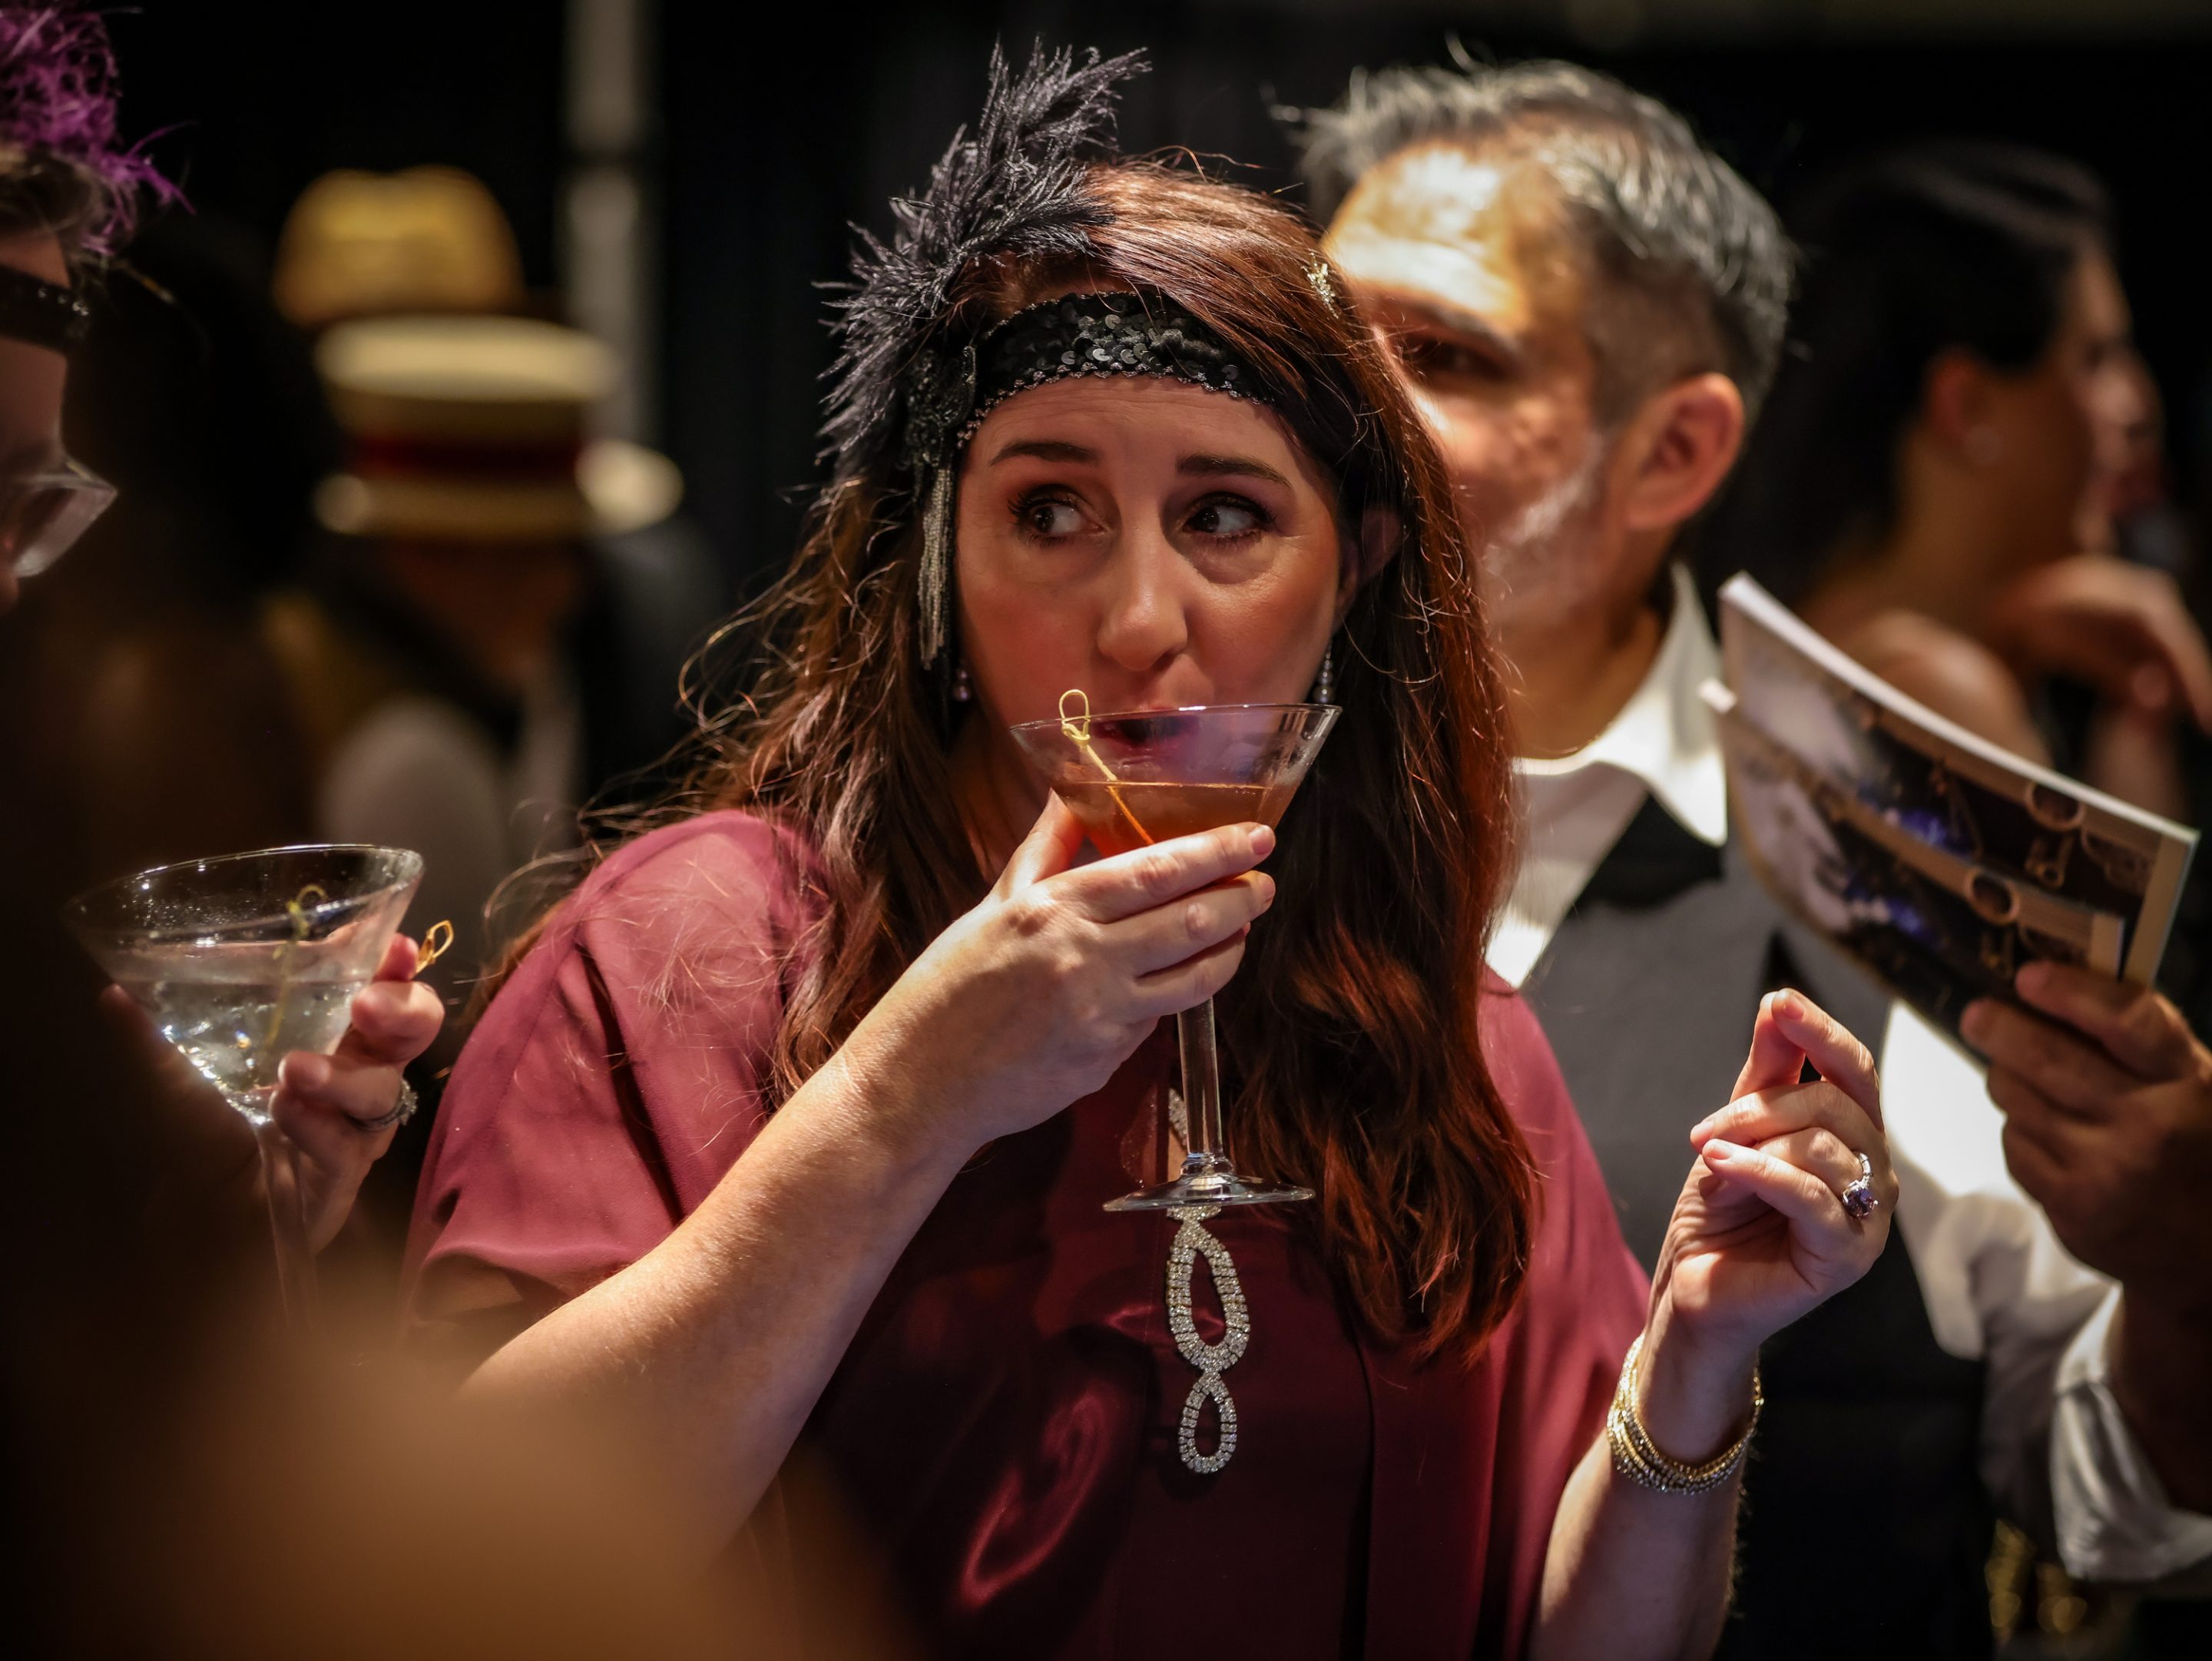 A woman enjoying a cocktail from a martini glass at a Santa Rosa Non-Profit event.